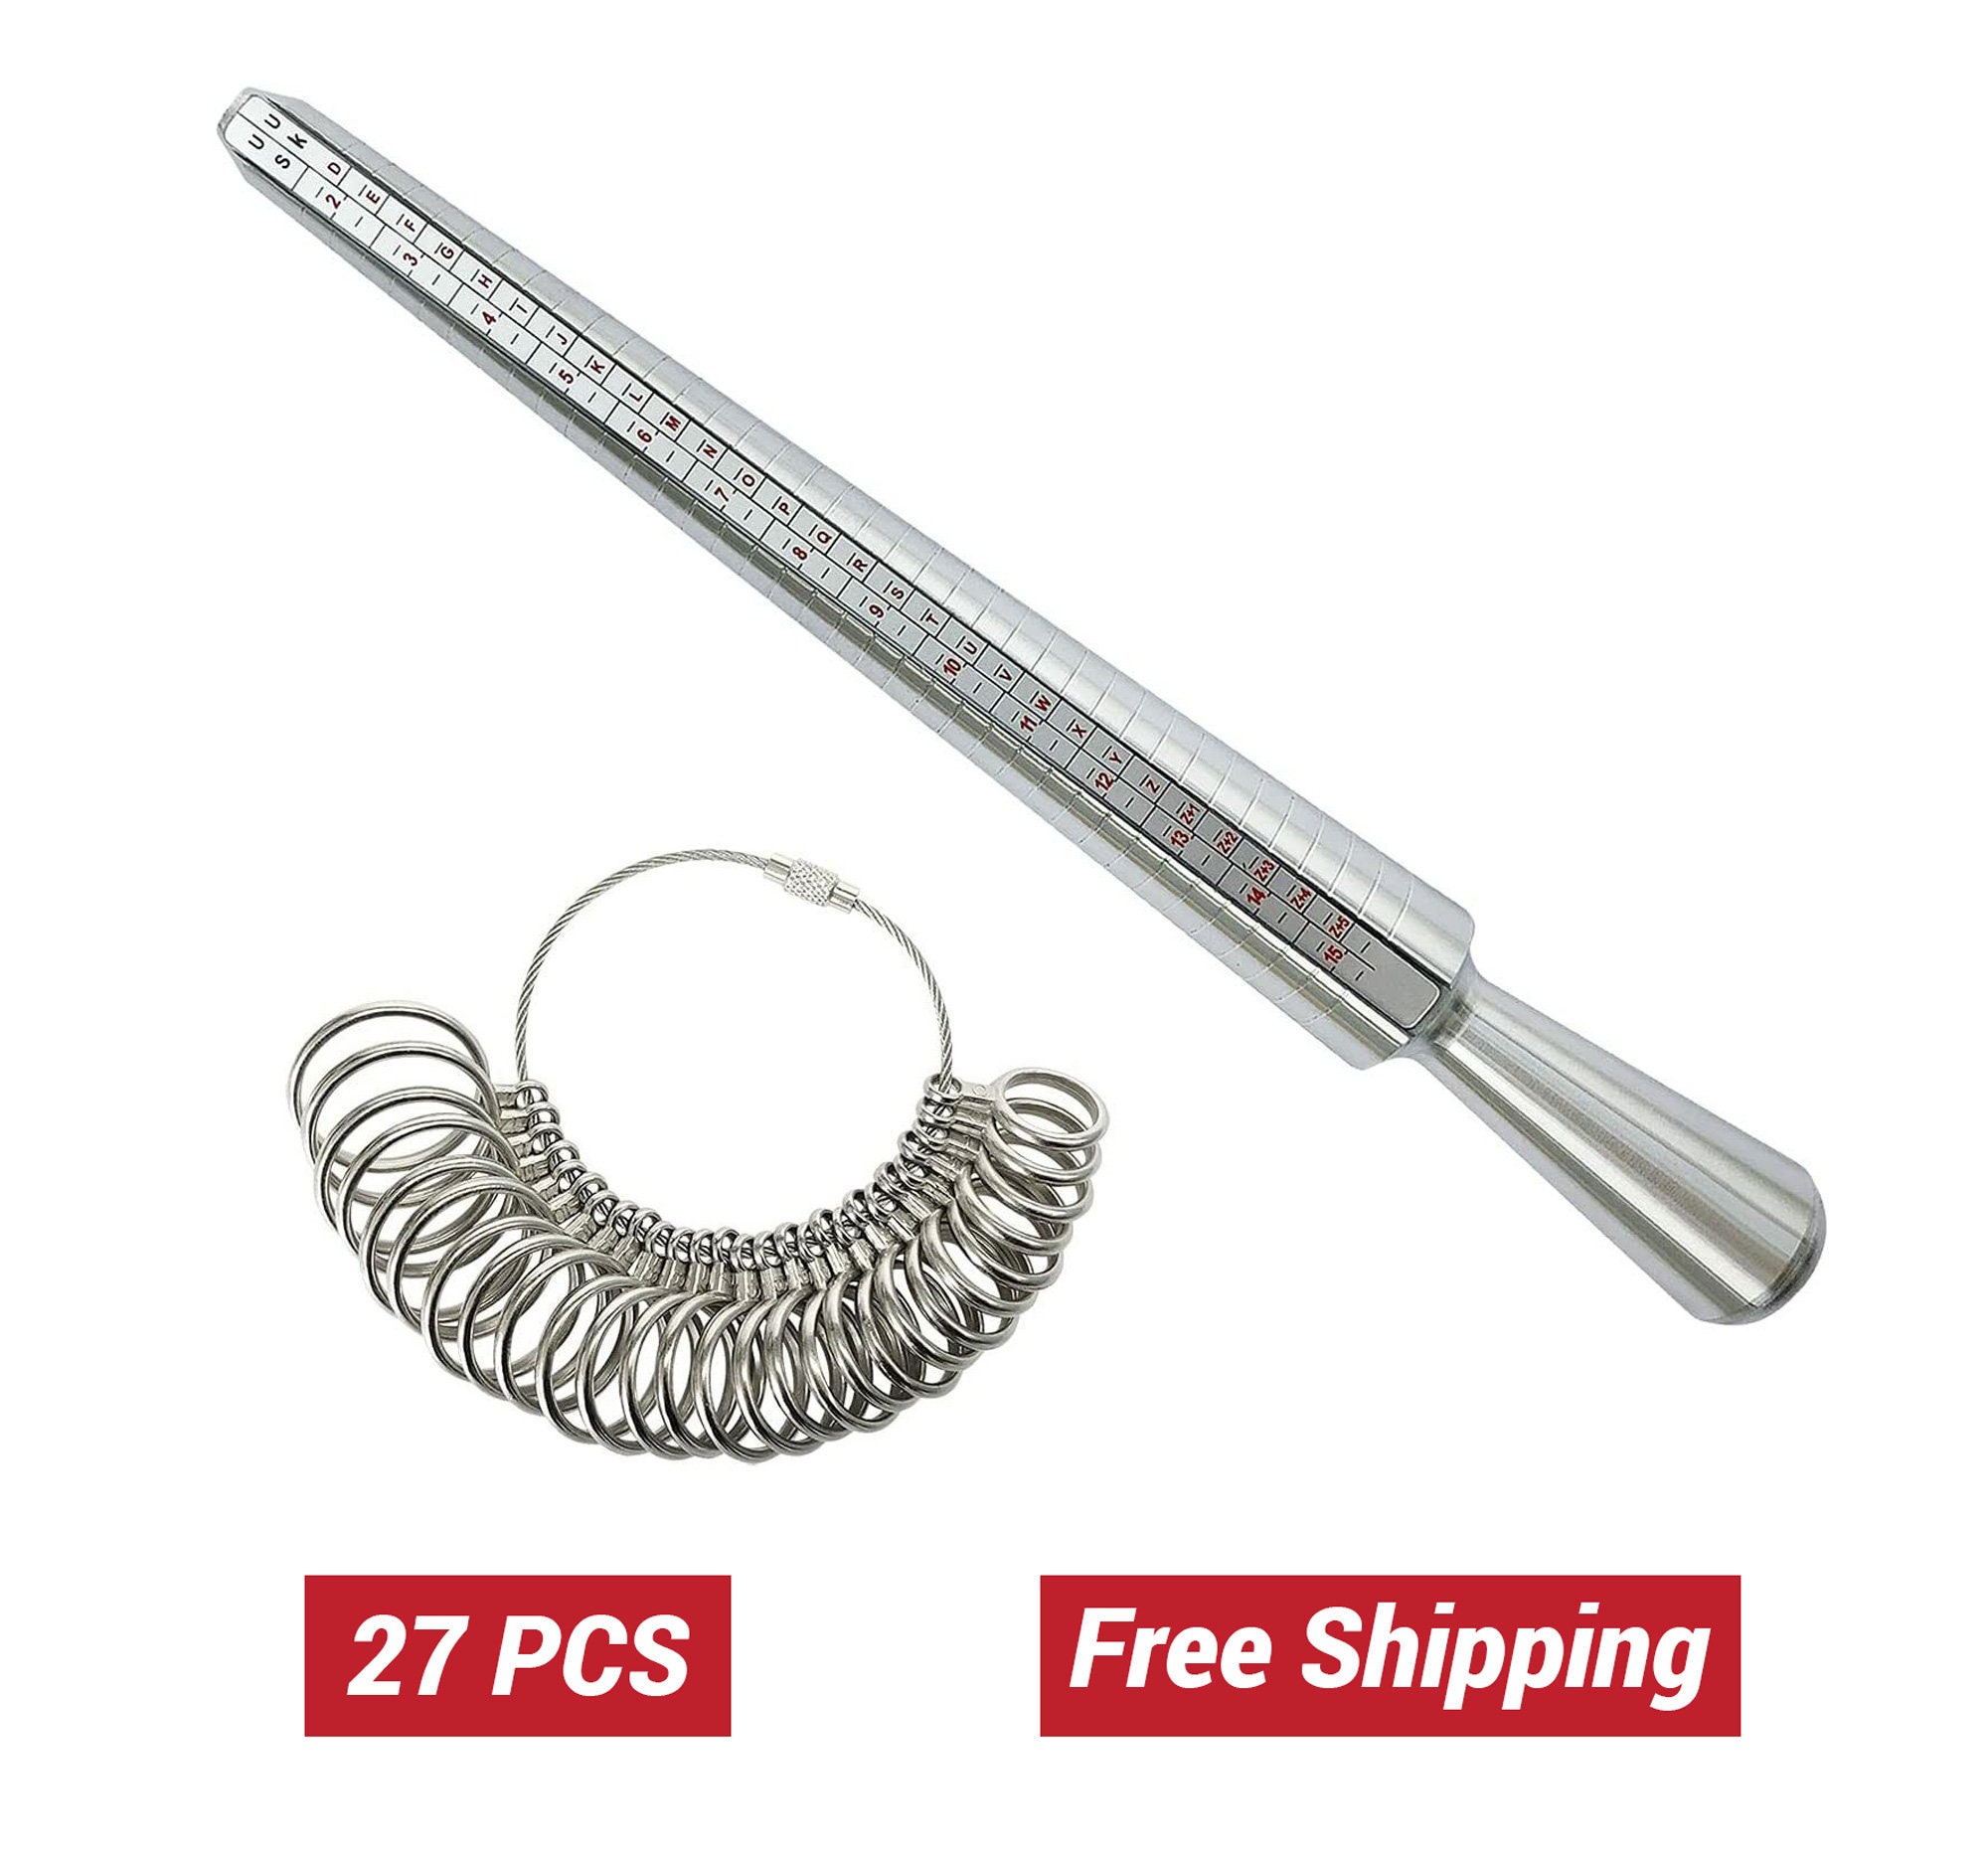 1 Pc Ring Sizer Scale Gauge Finger Stick Mandrel Measurement Jewelry Tools  Check Size